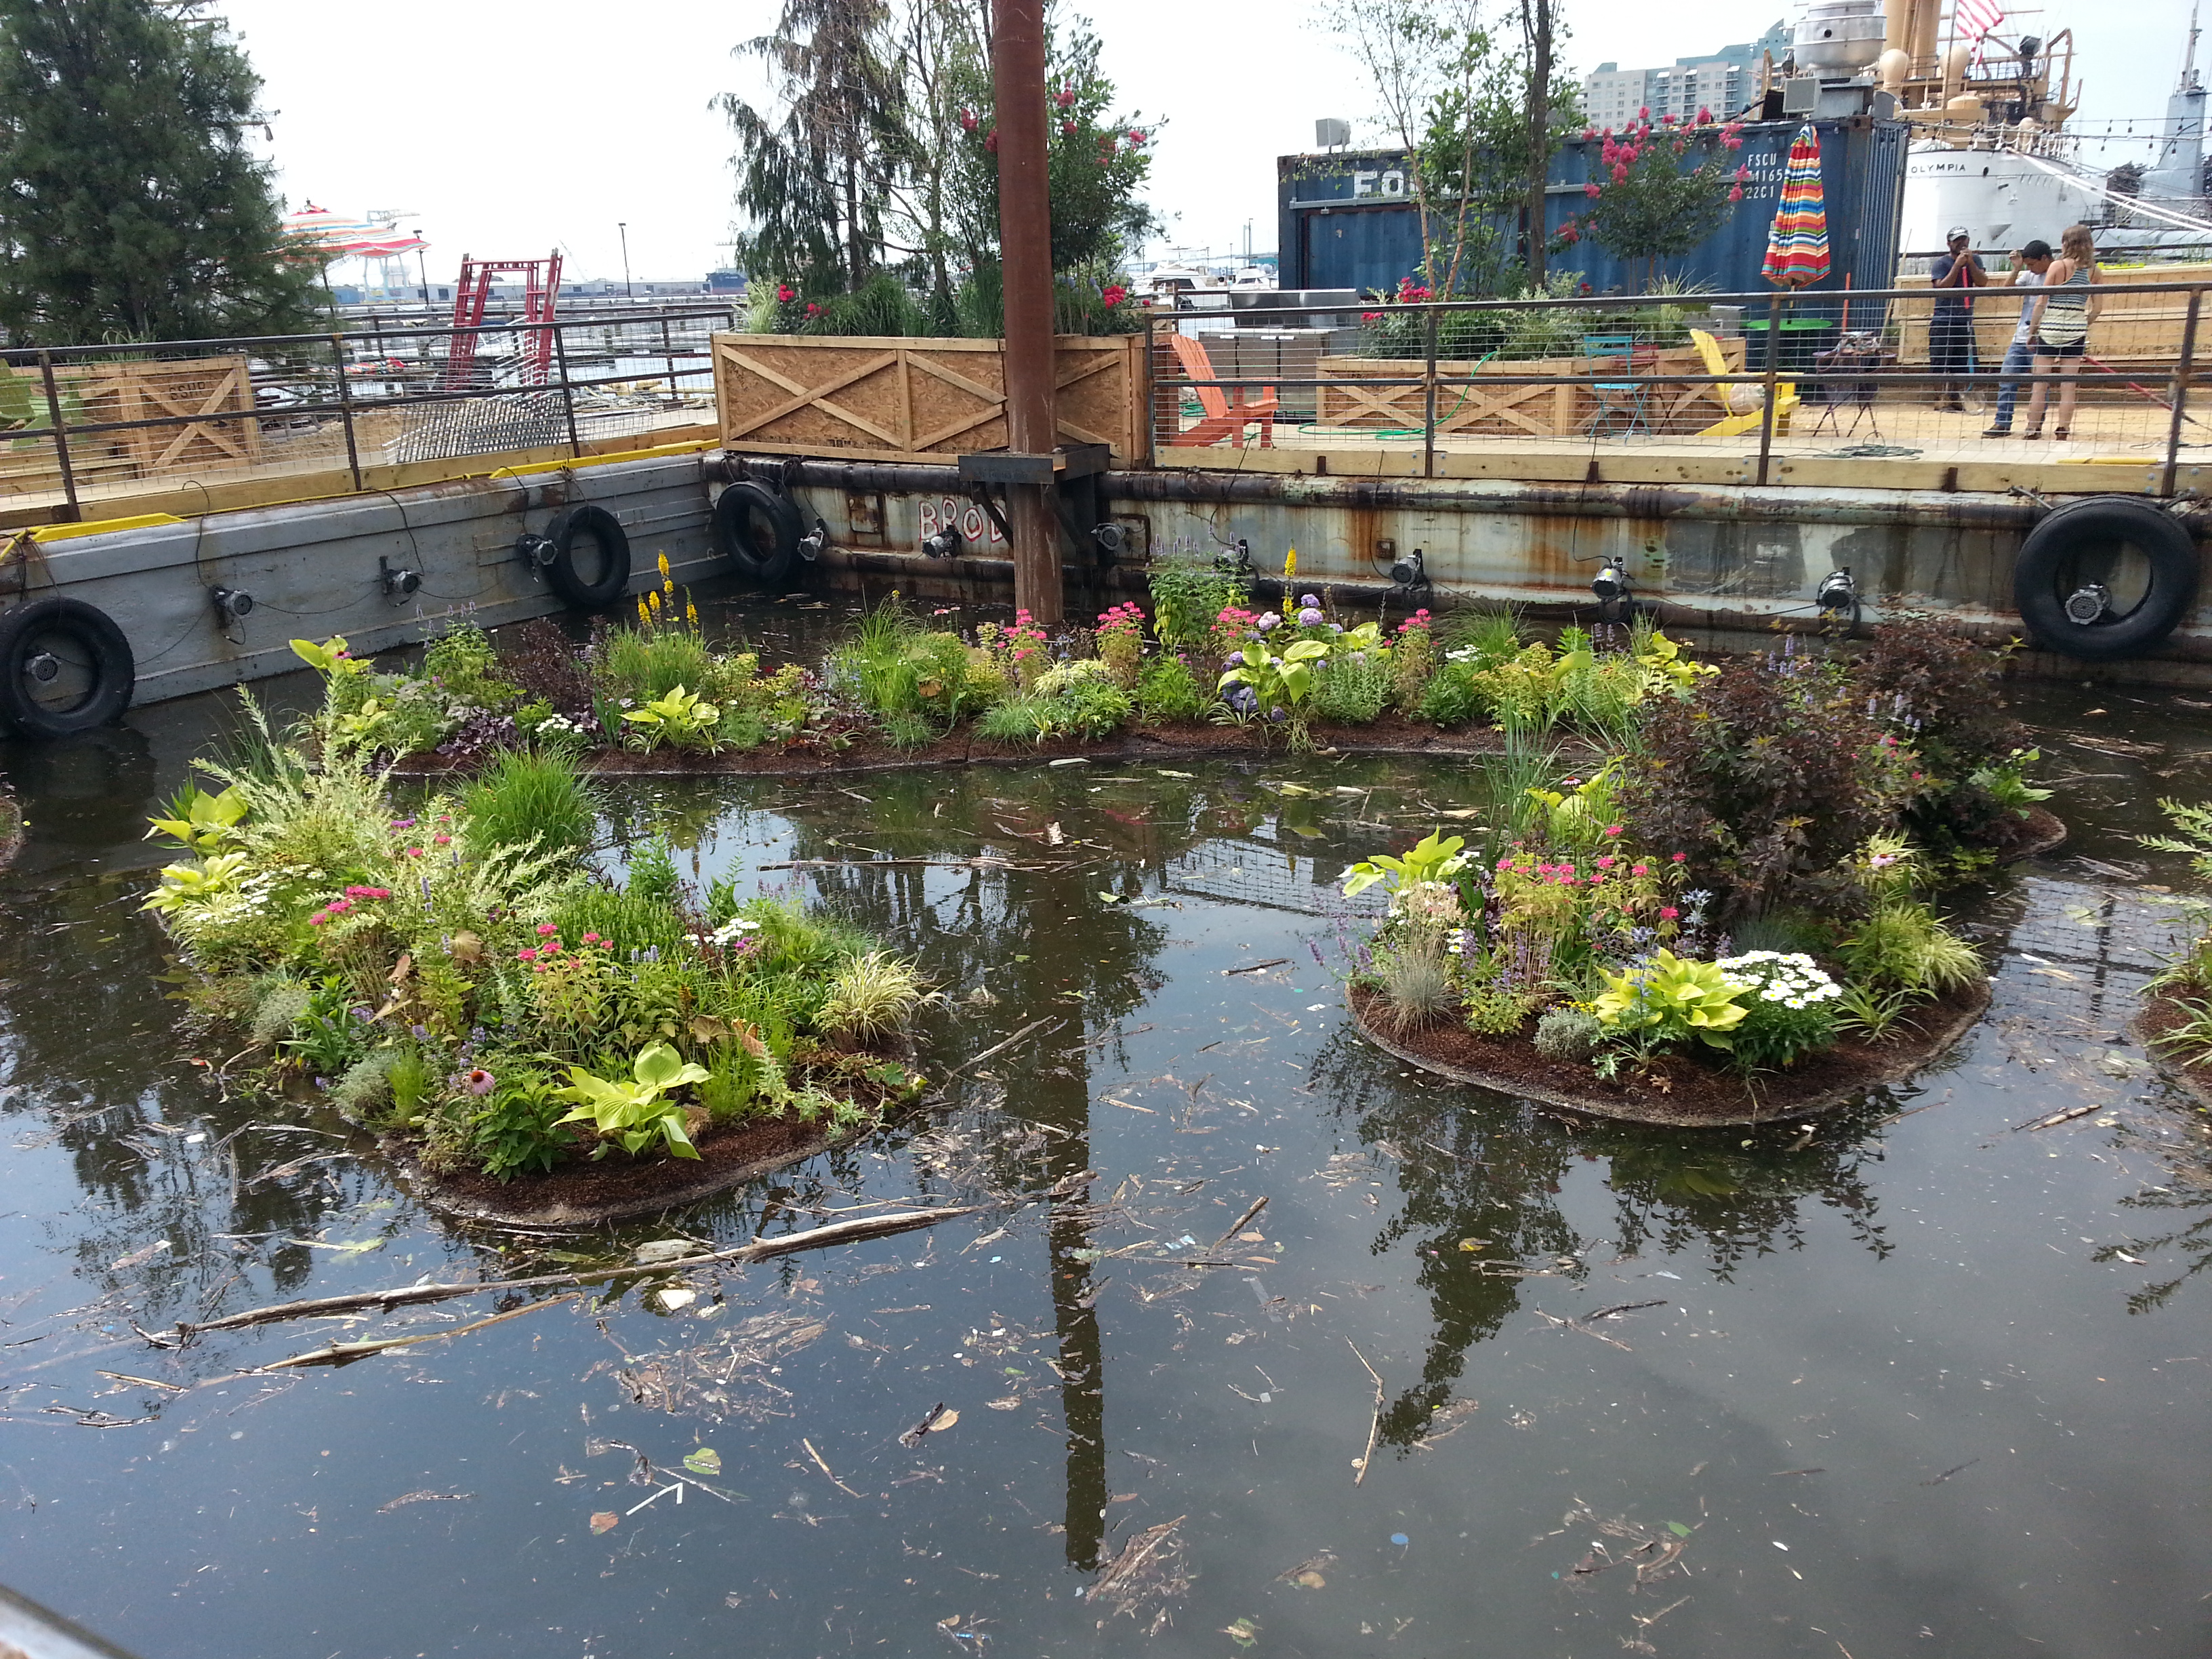 The floating gardens at Spruce Street Harbor Park